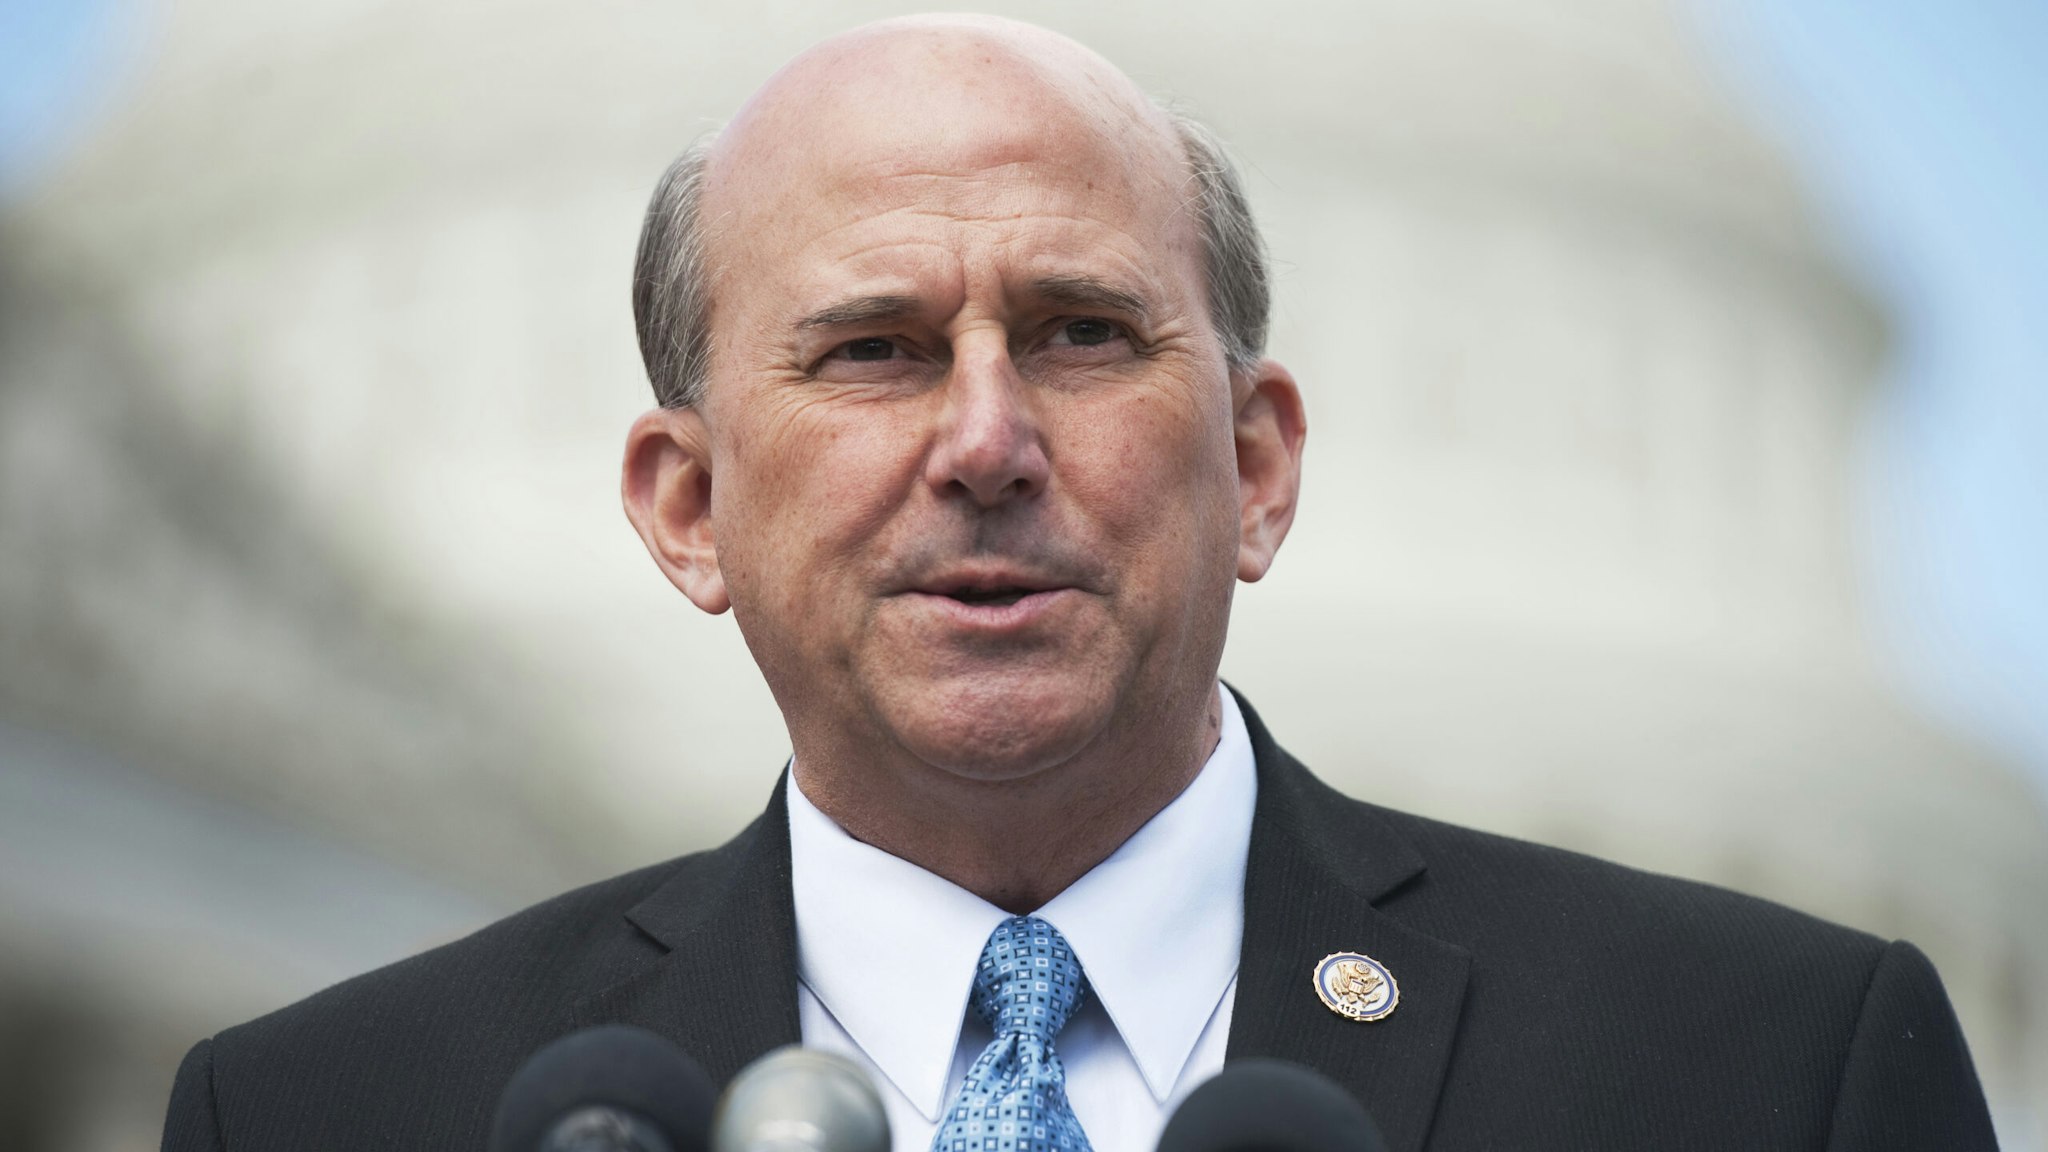 UNITED STATES - MARCH 29: Rep. Louie Gohmert, R-Texas, speaks at a news conference at the house triangle with other members of the House Natural Resources Committee on energy provisions in the House Republican budget.